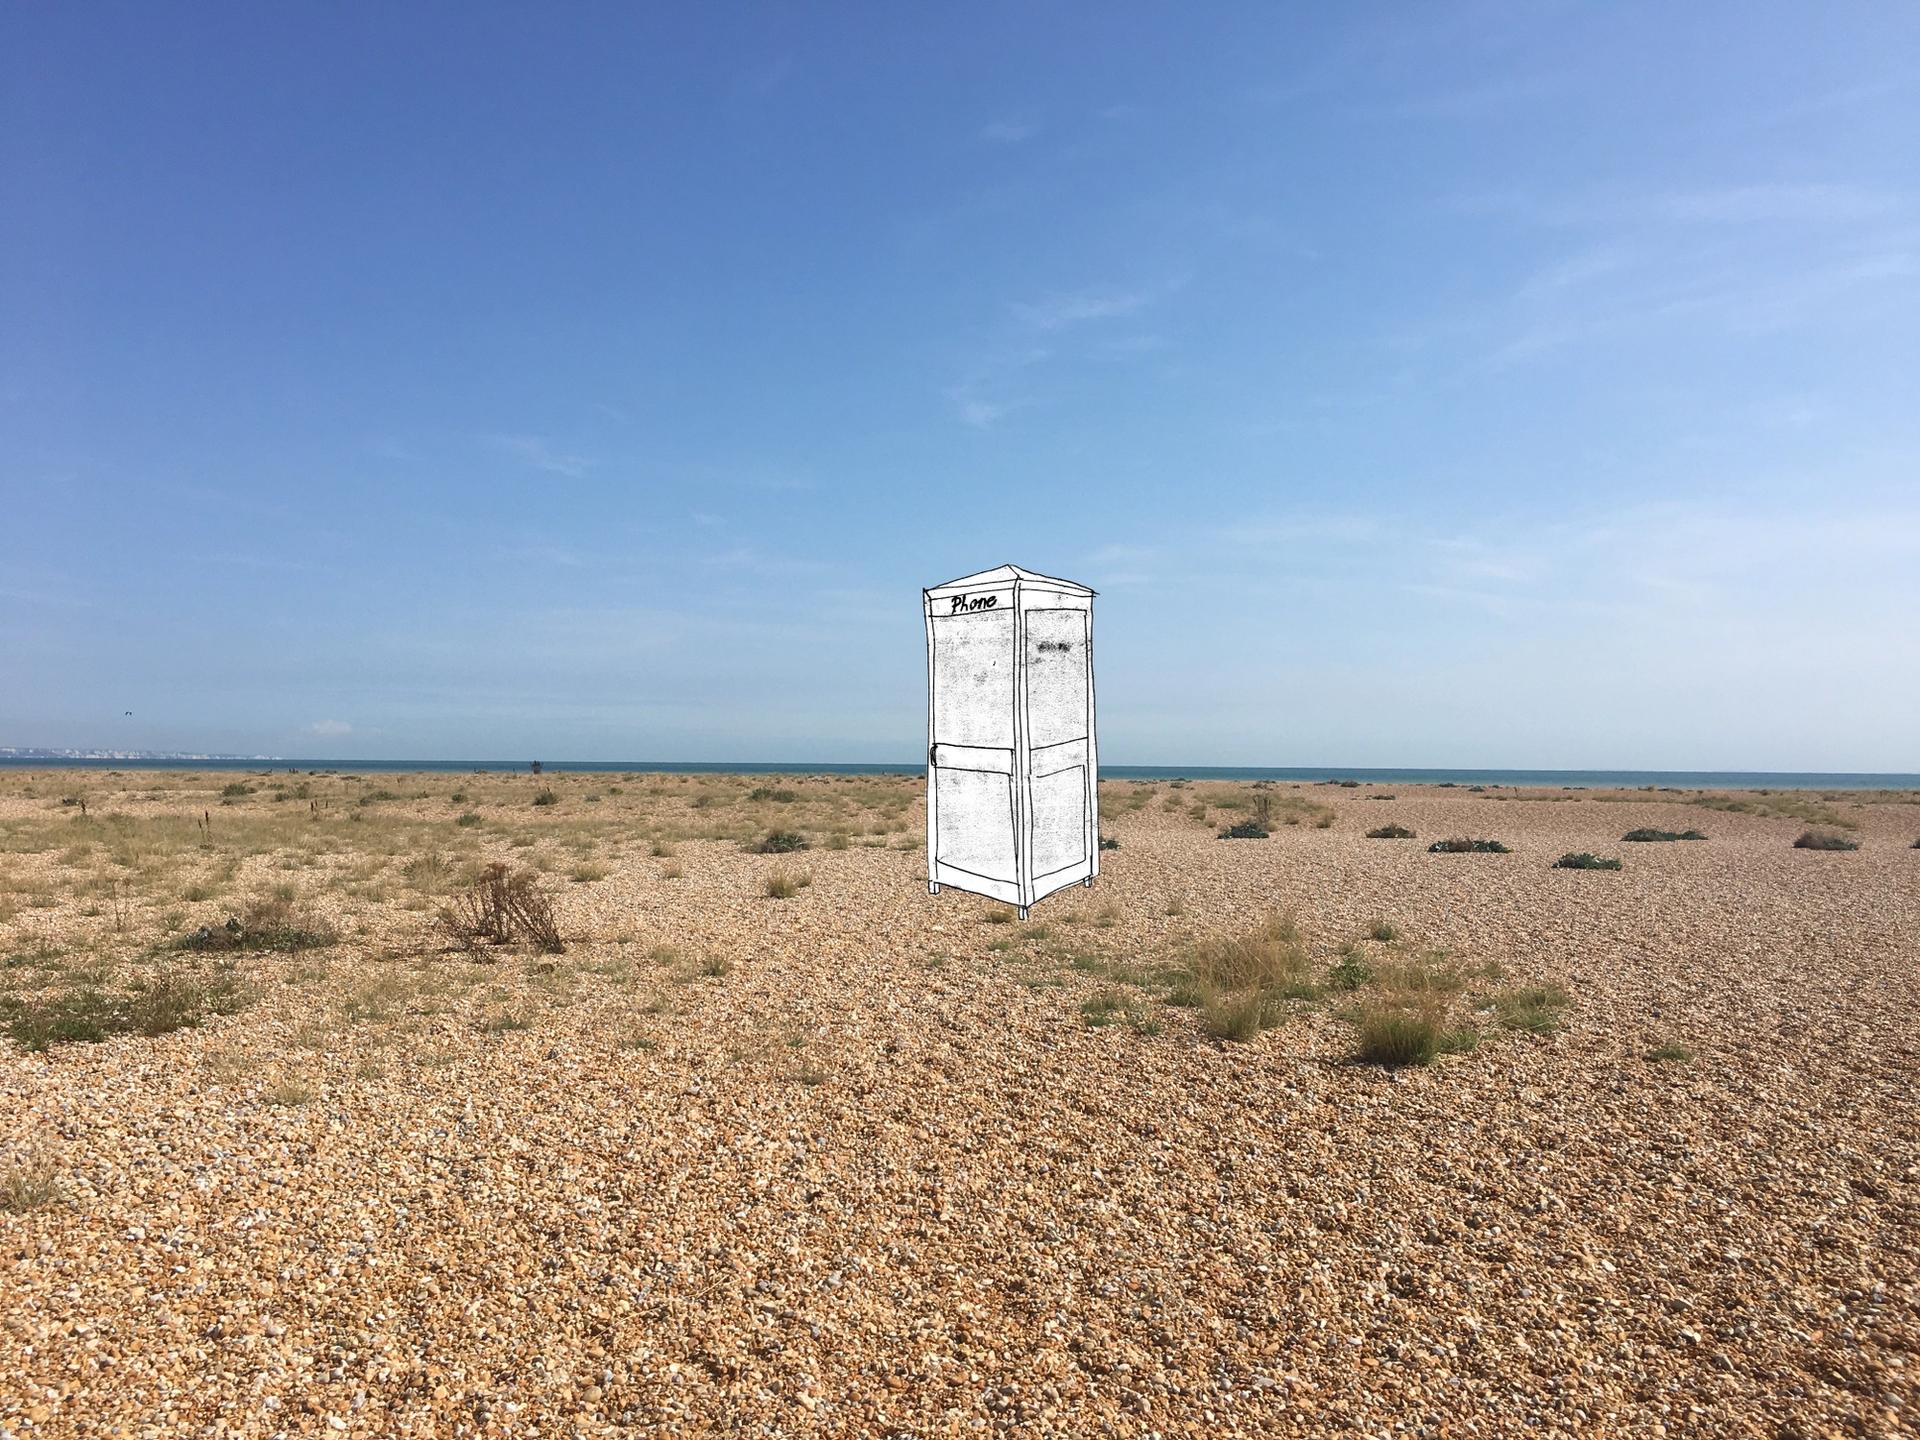 BT phone home: The public will be able to leave messages about Brexit in Joe Sweeney's 1990s photo booth on the Kent coast © Joe Sweeney; courtesy of Cob Gallery